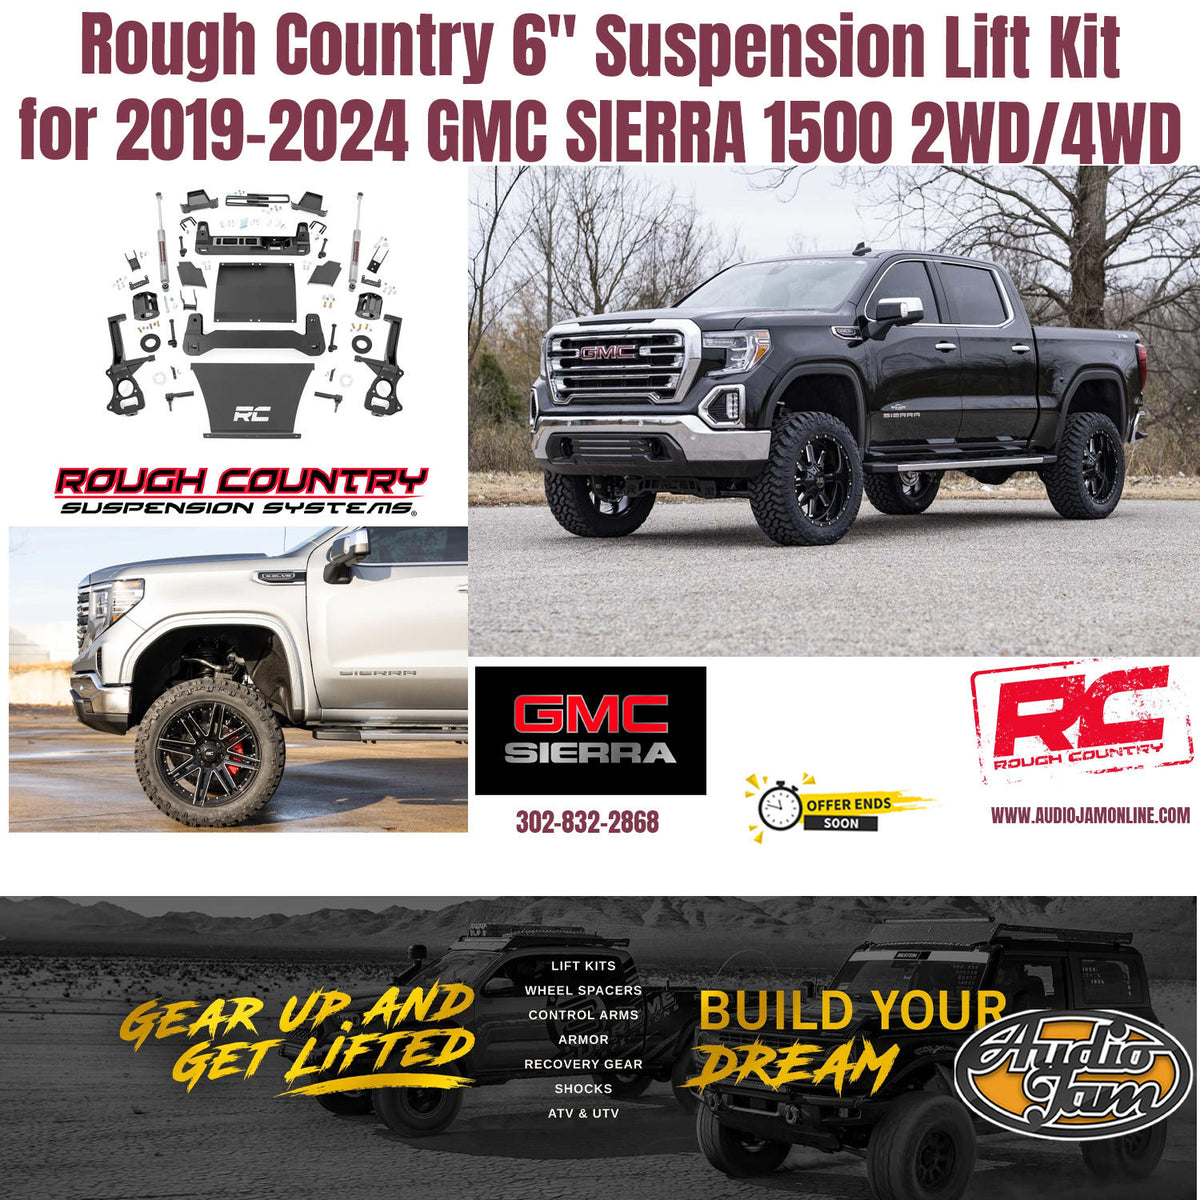 Rough Country 6" Suspension Lift Kit for 2019-2024 GMC SIERRA 1500 2WD/4WD